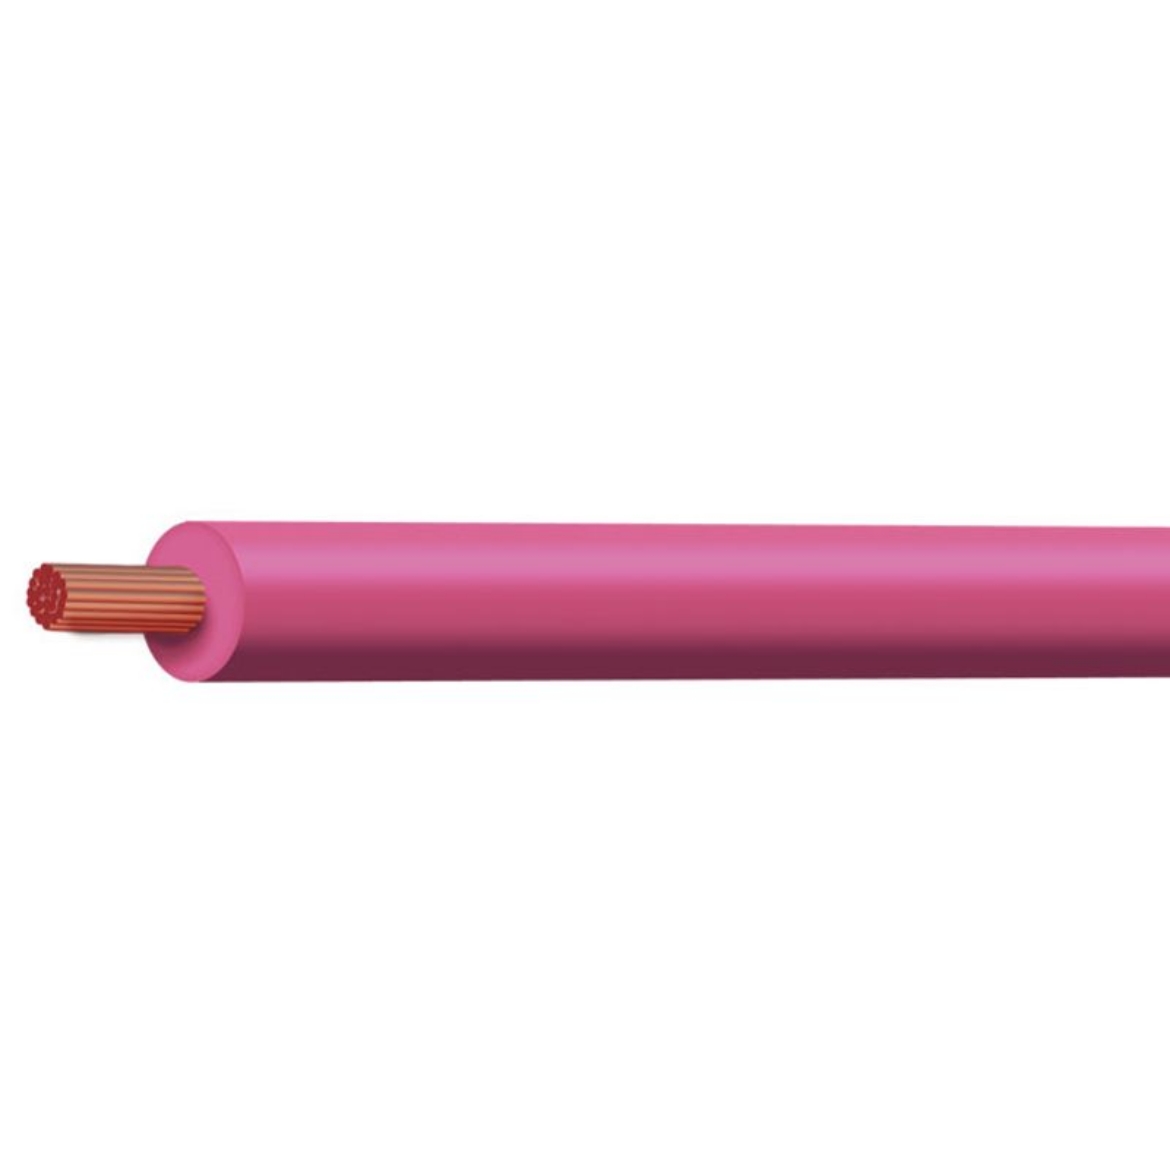 Picture of TYCAB 4MM SINGLE CORE CABLE 15A PINK - 30M ROLL